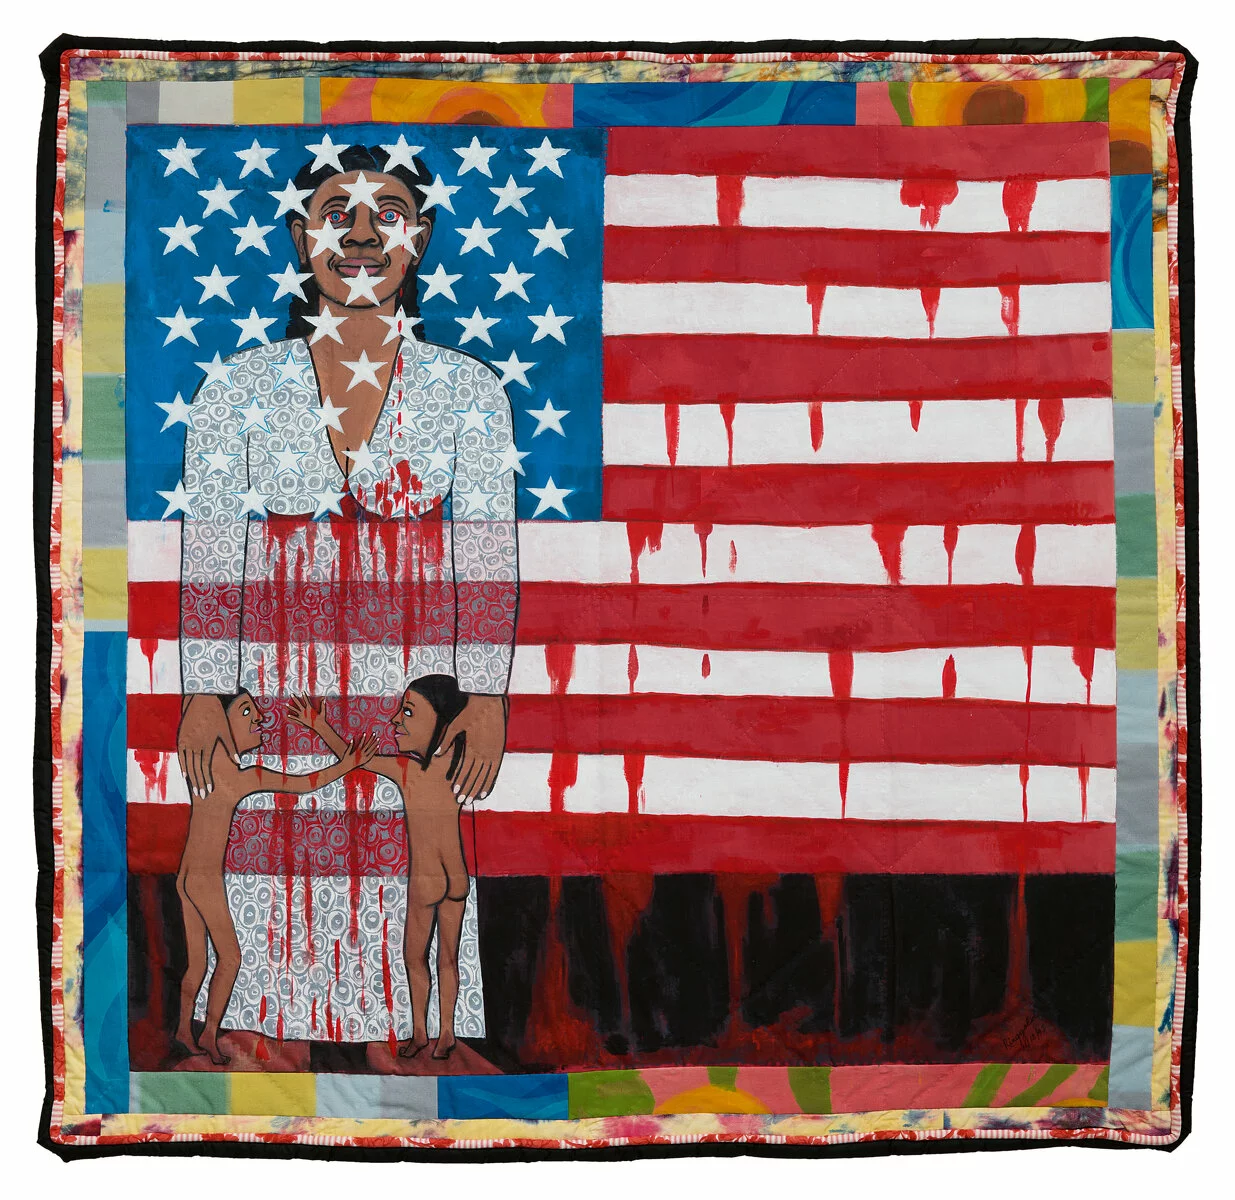 A quilt-like object with the American flag in the middle, slightly transposed over a woman being hugged by two naked children.